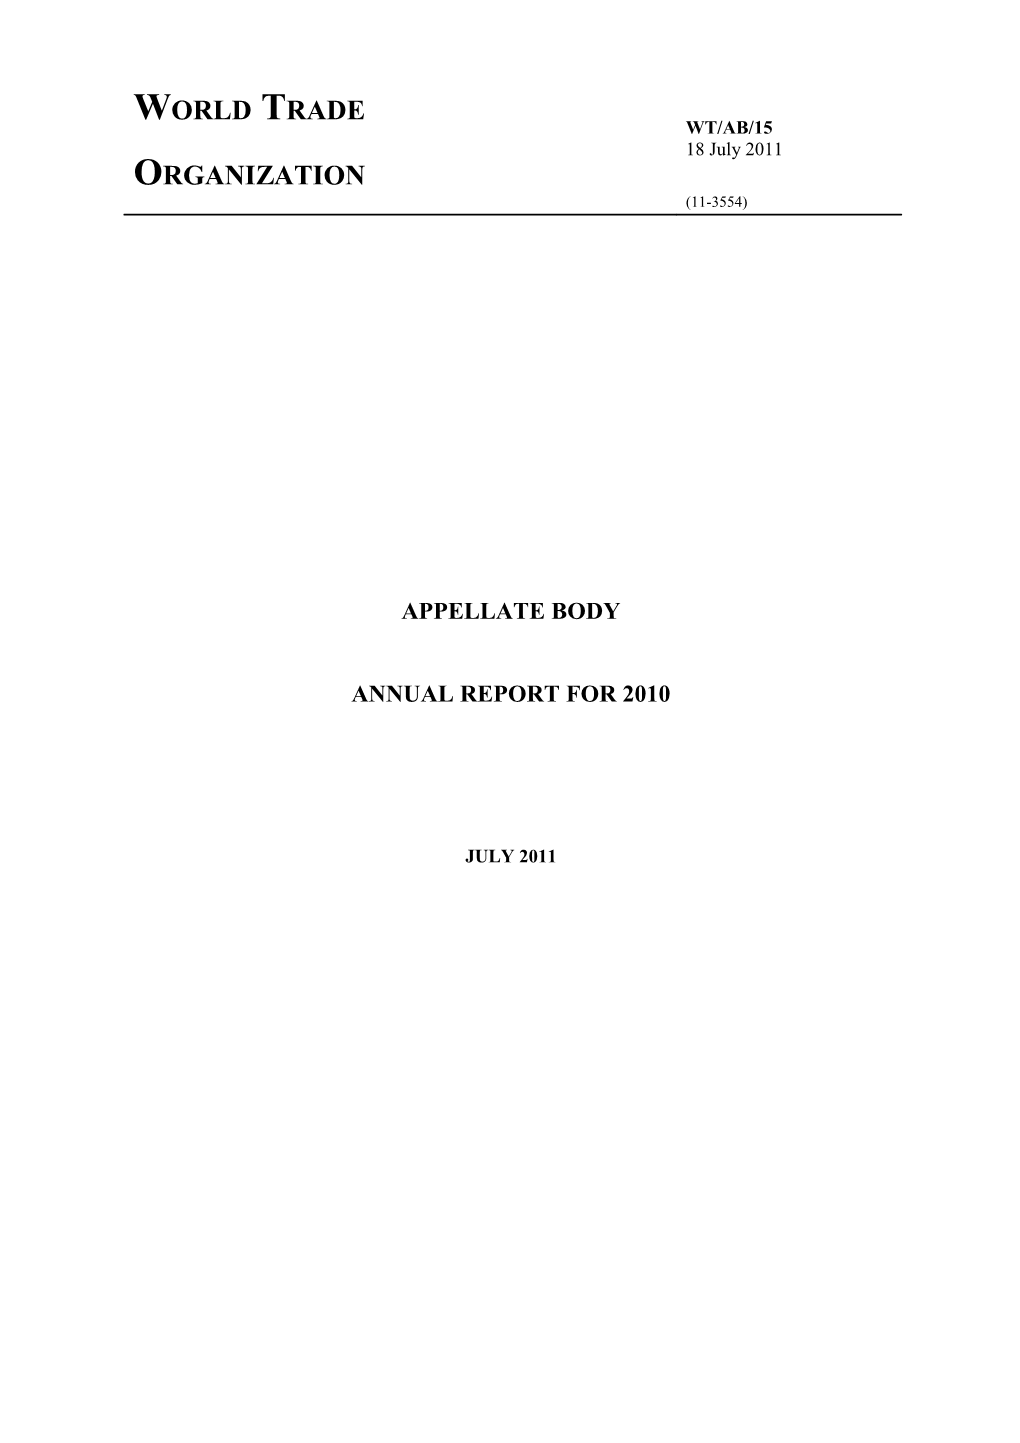 Annual Report for 2010